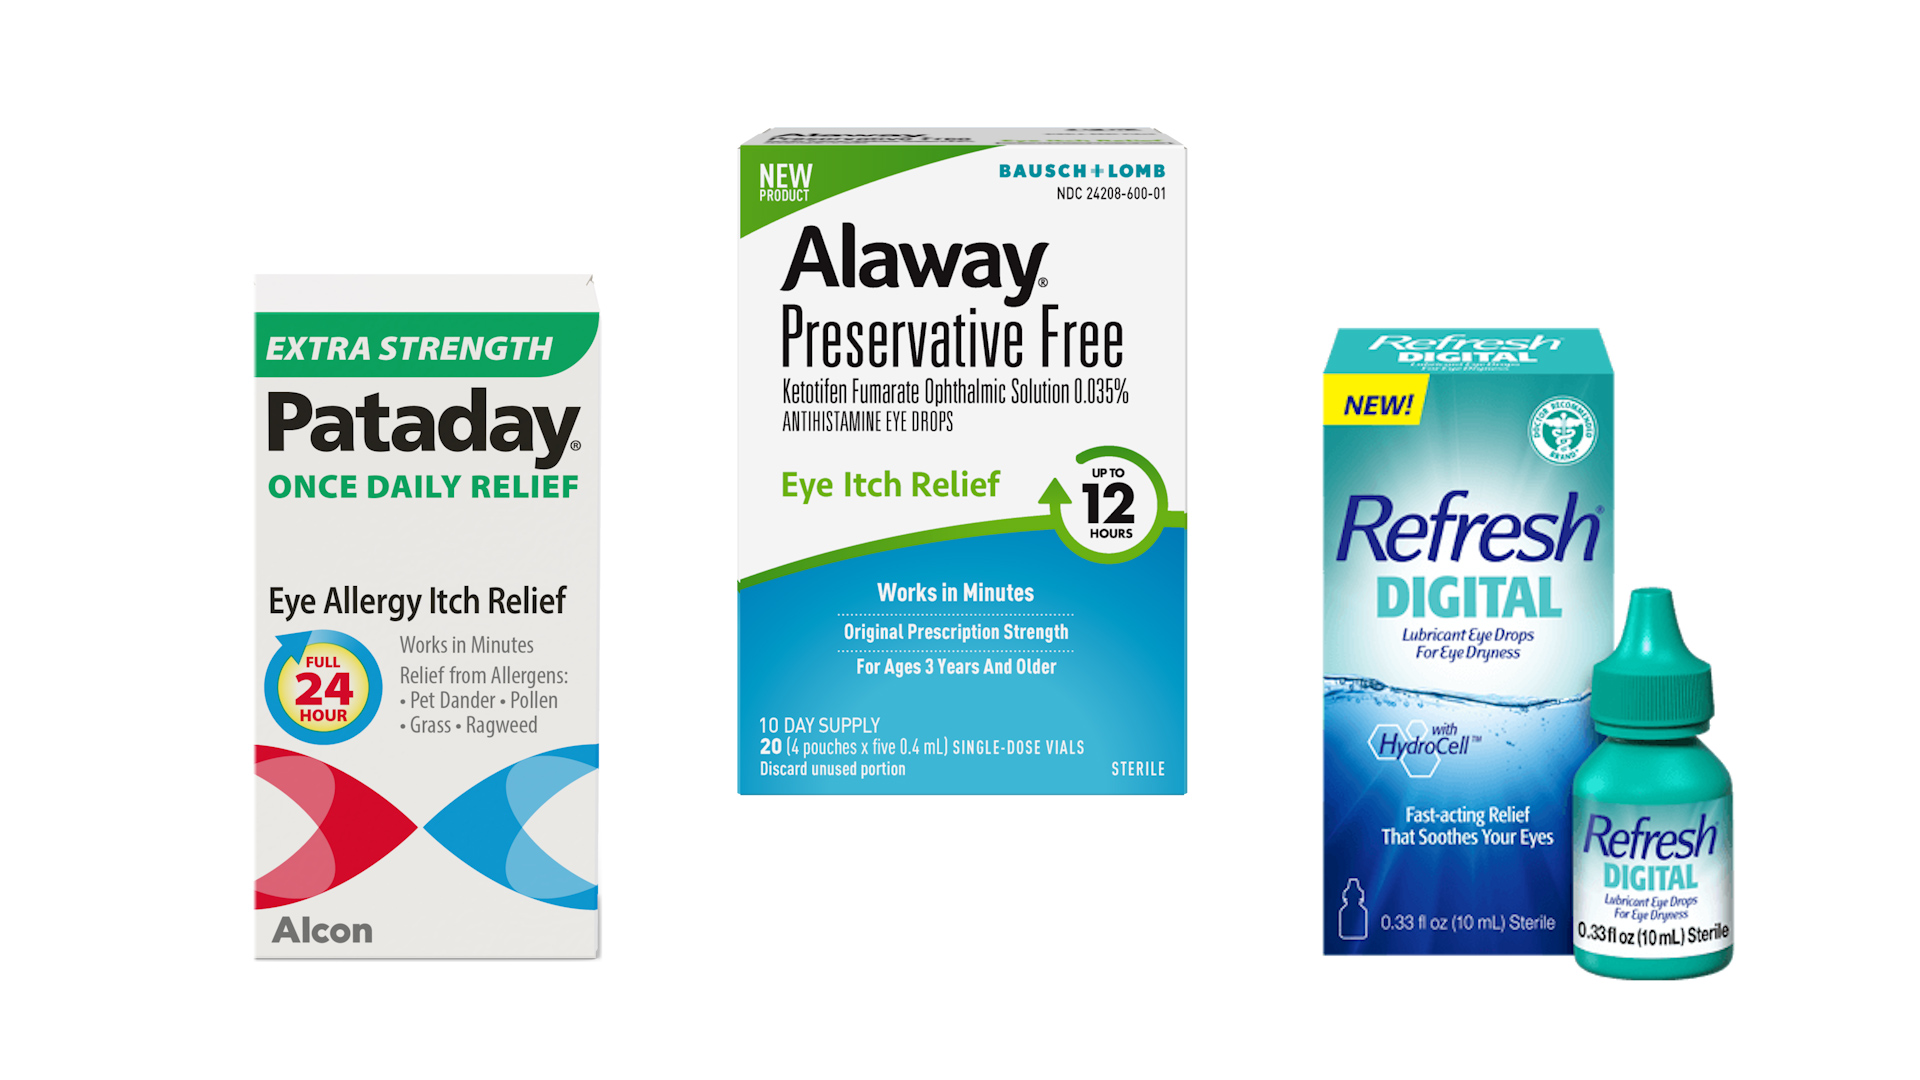 Three OTC Eye Drops Launched for Relief of Ocular Allergy, Eye Itch